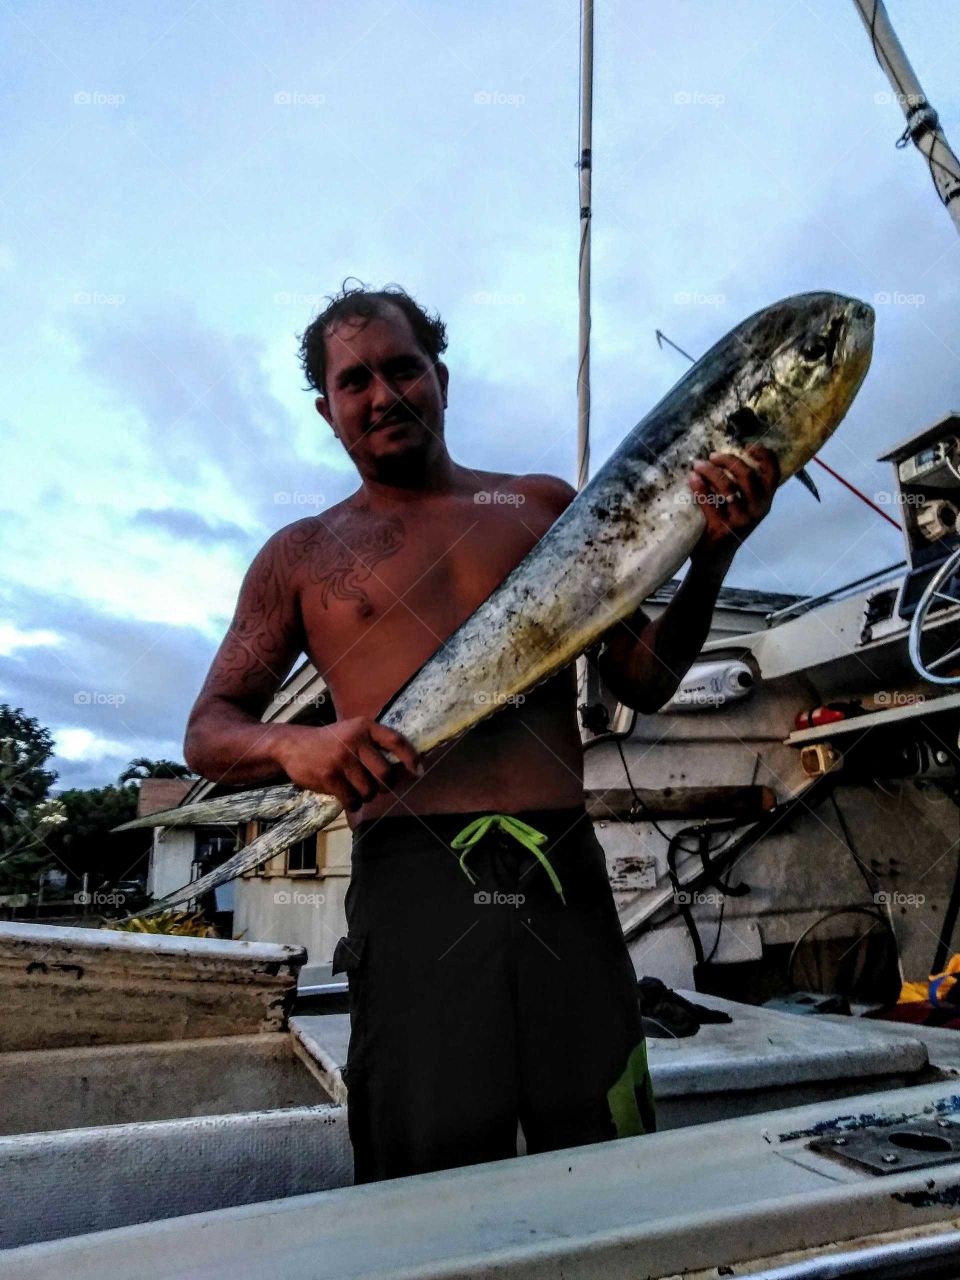 Oh yes!  Catch of the Day, MahiMahi